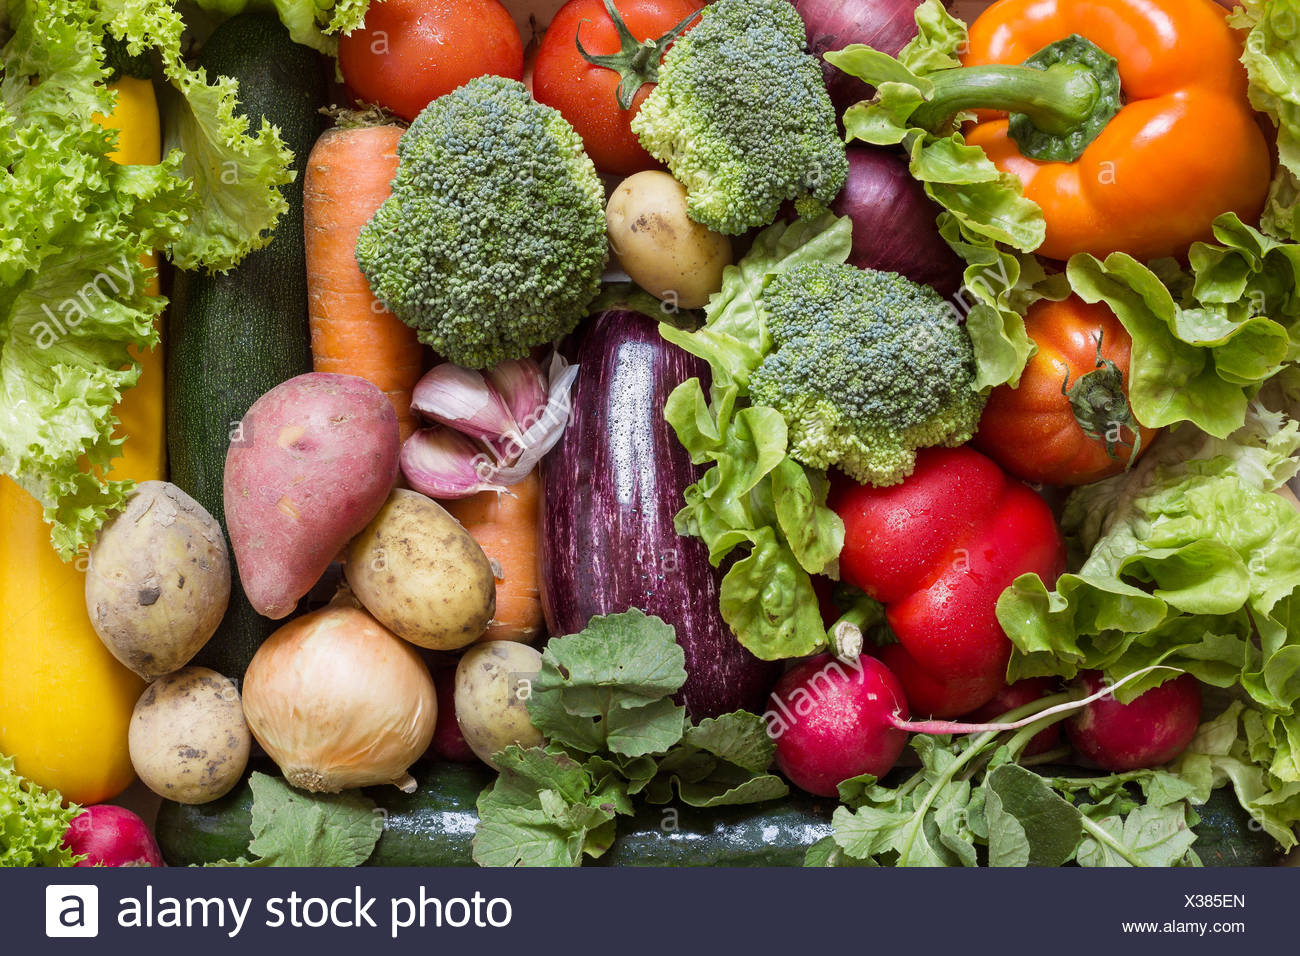 Various Vegetables With Fresh Greens As A Healthy Life Style Stock Photo Alamy